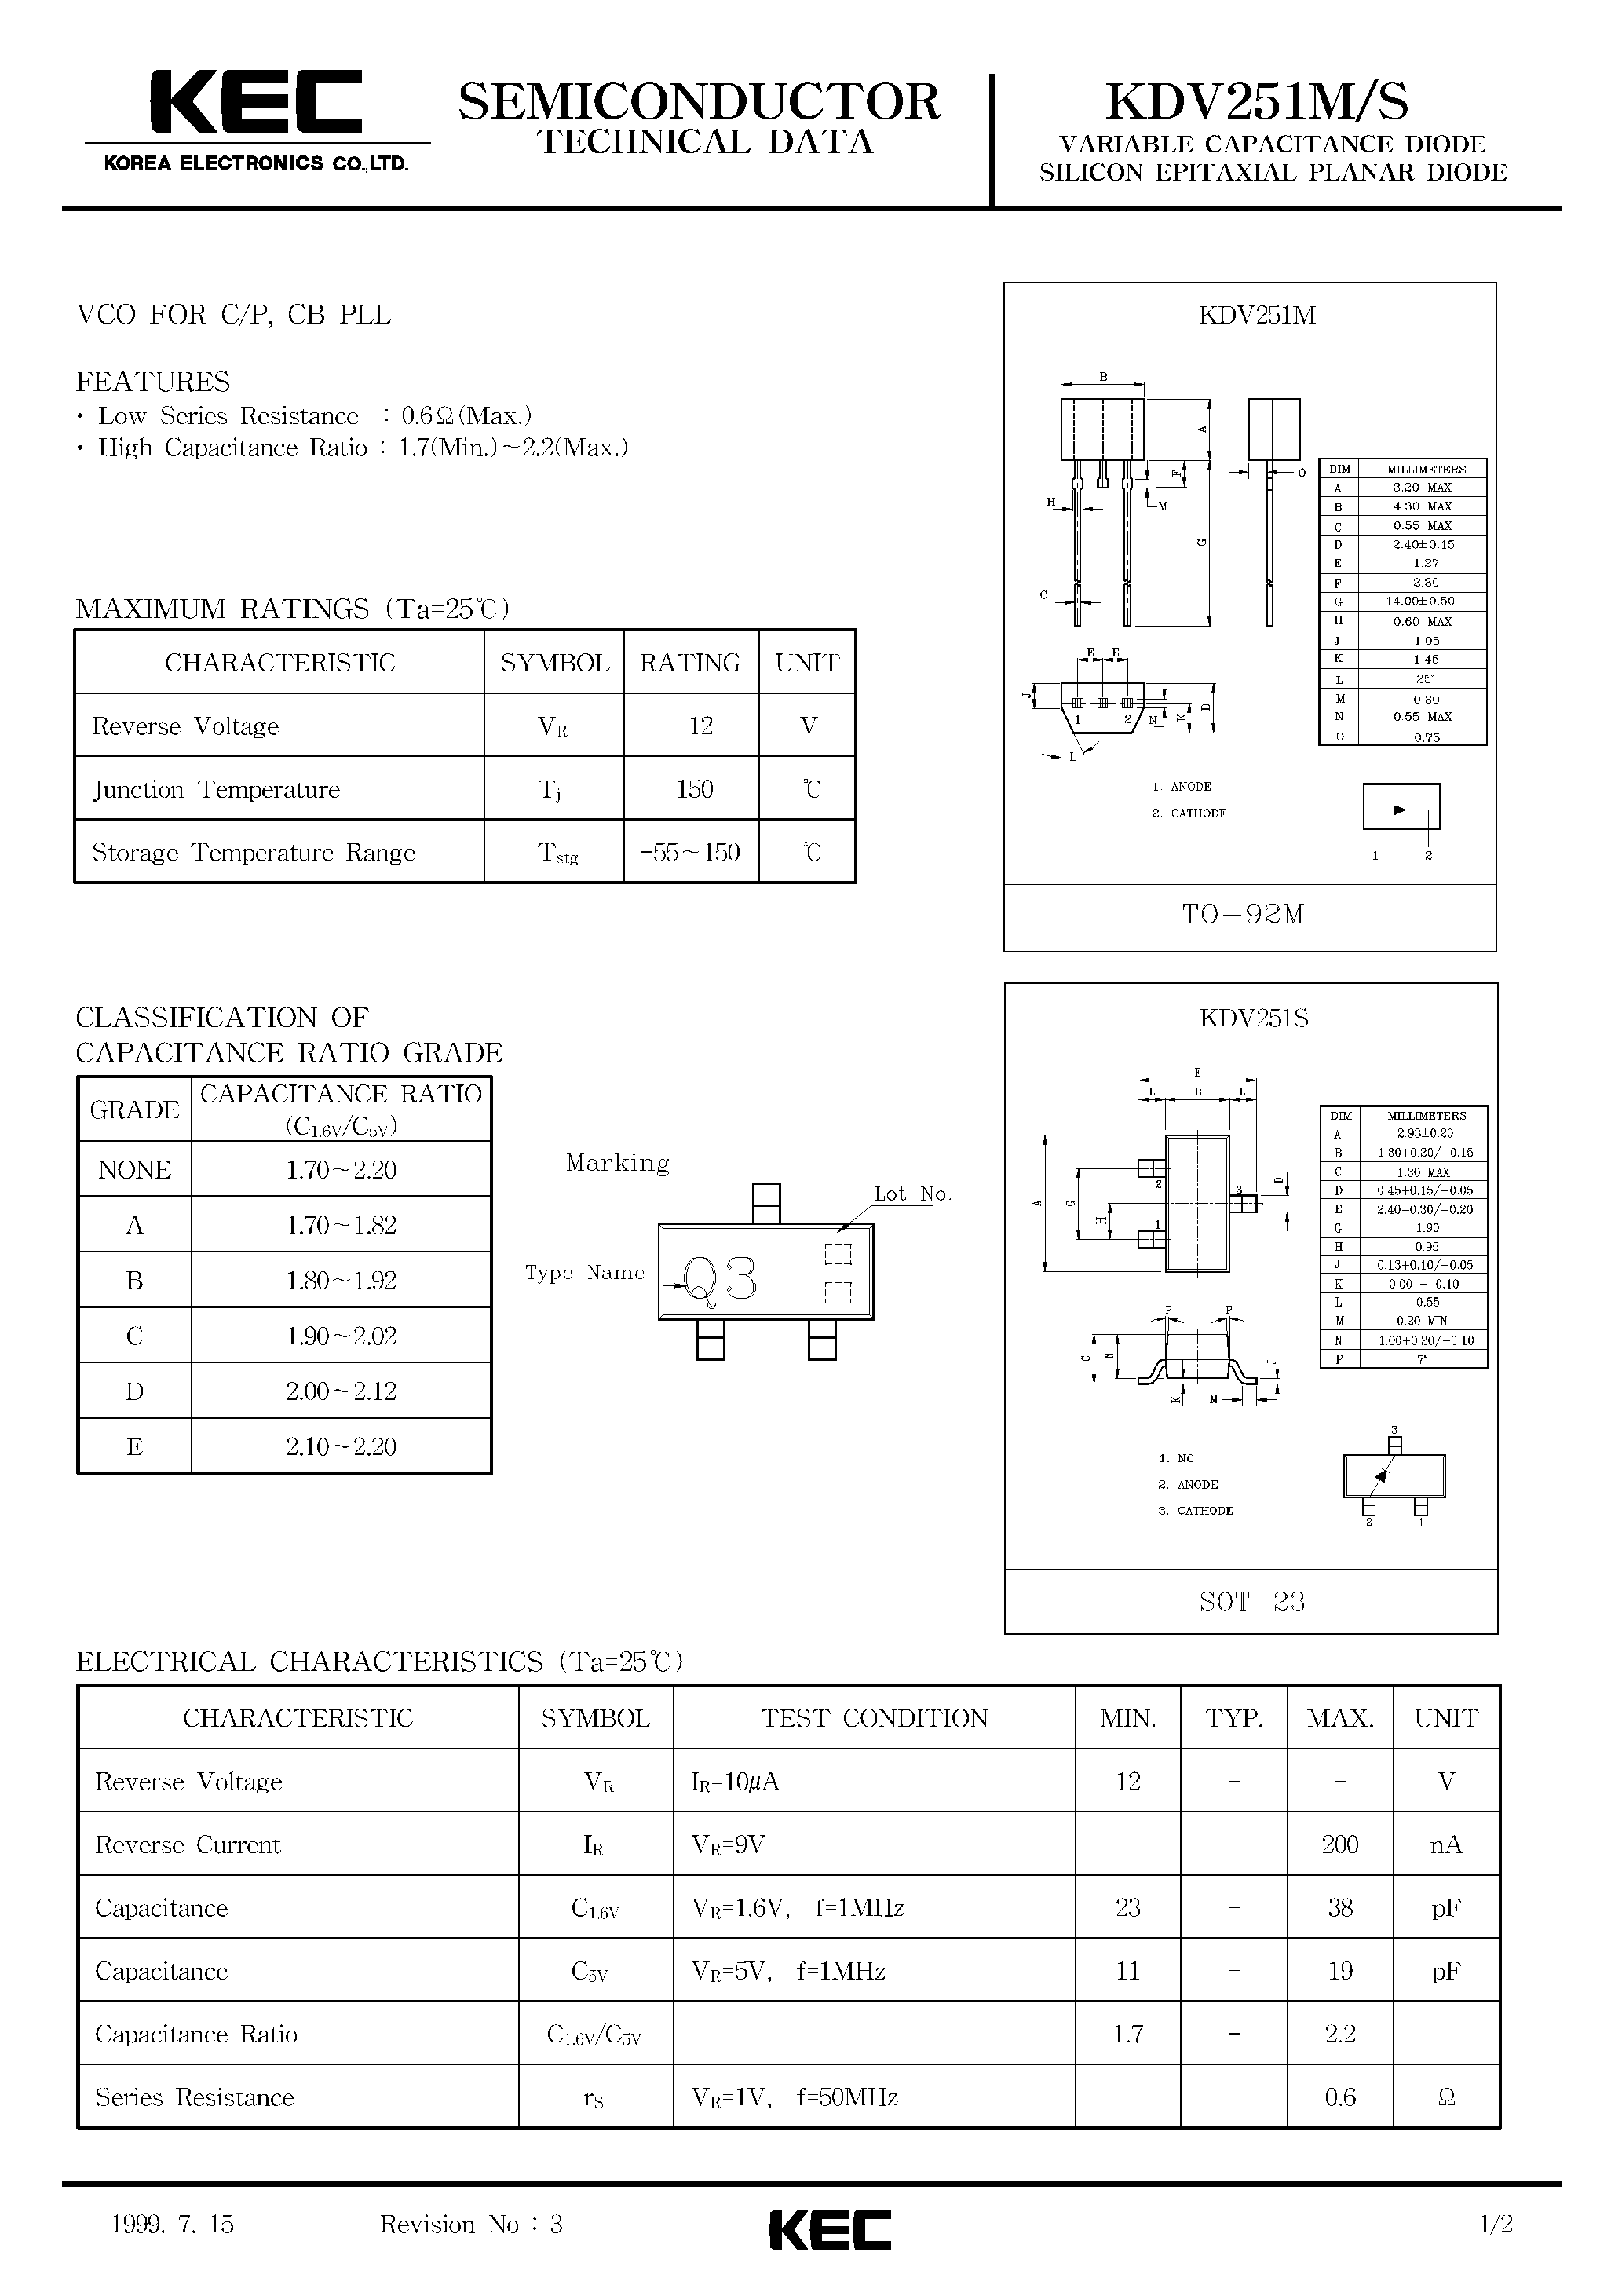 Datasheet KDV251 - VARIABLE CAPACITANCE DIODE SILICON EPITAXIAL PLANAR DIODE(VCO FOR CB/C/P PLL) page 1